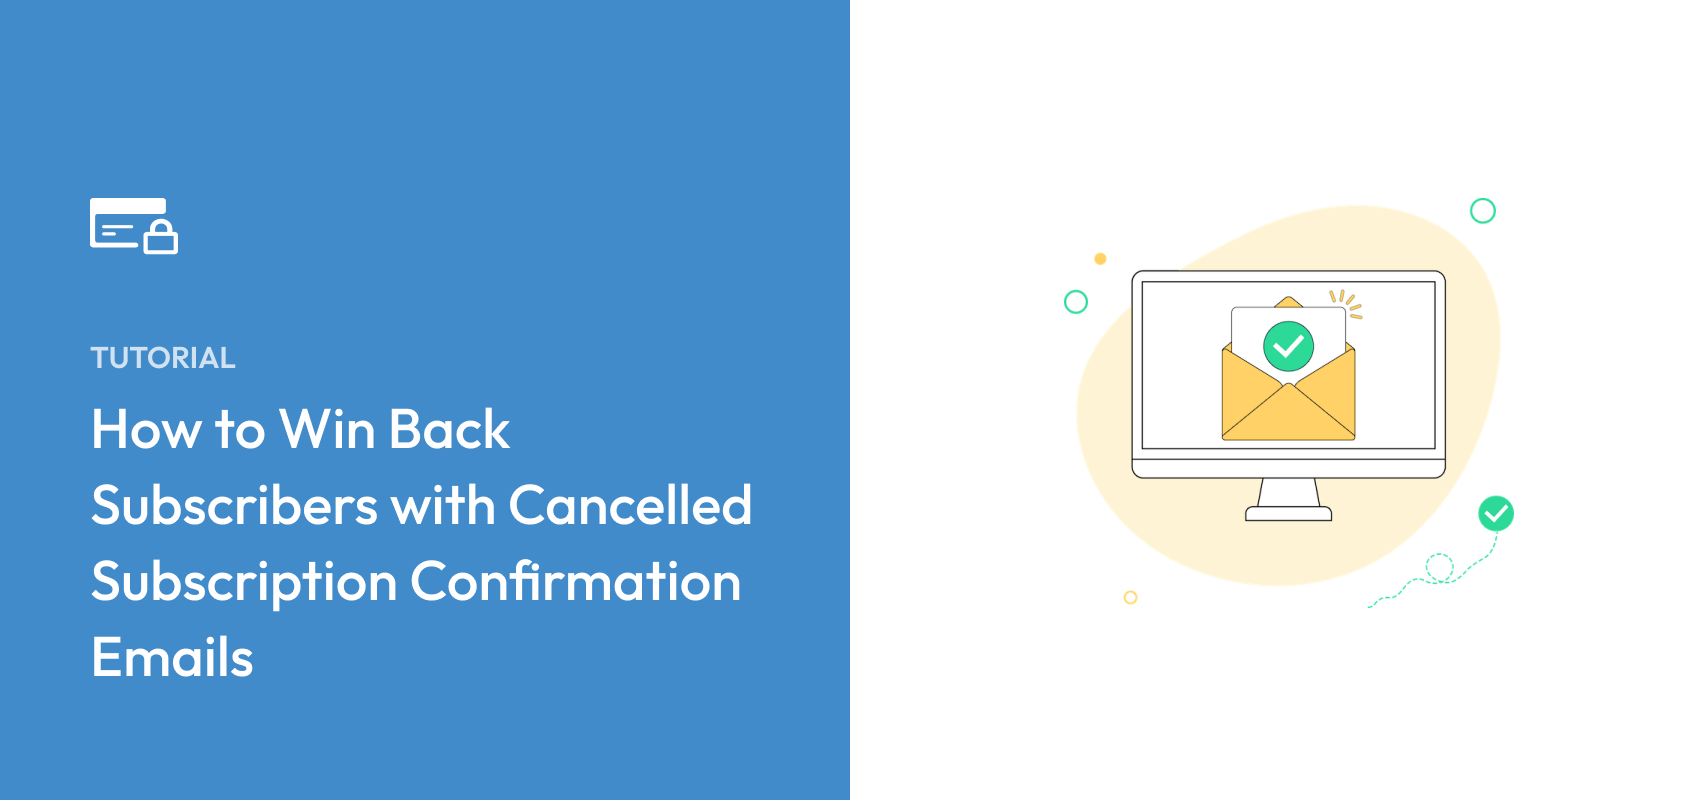 How to Win Back Subscribers with Cancelled Subscription Confirmation Emails